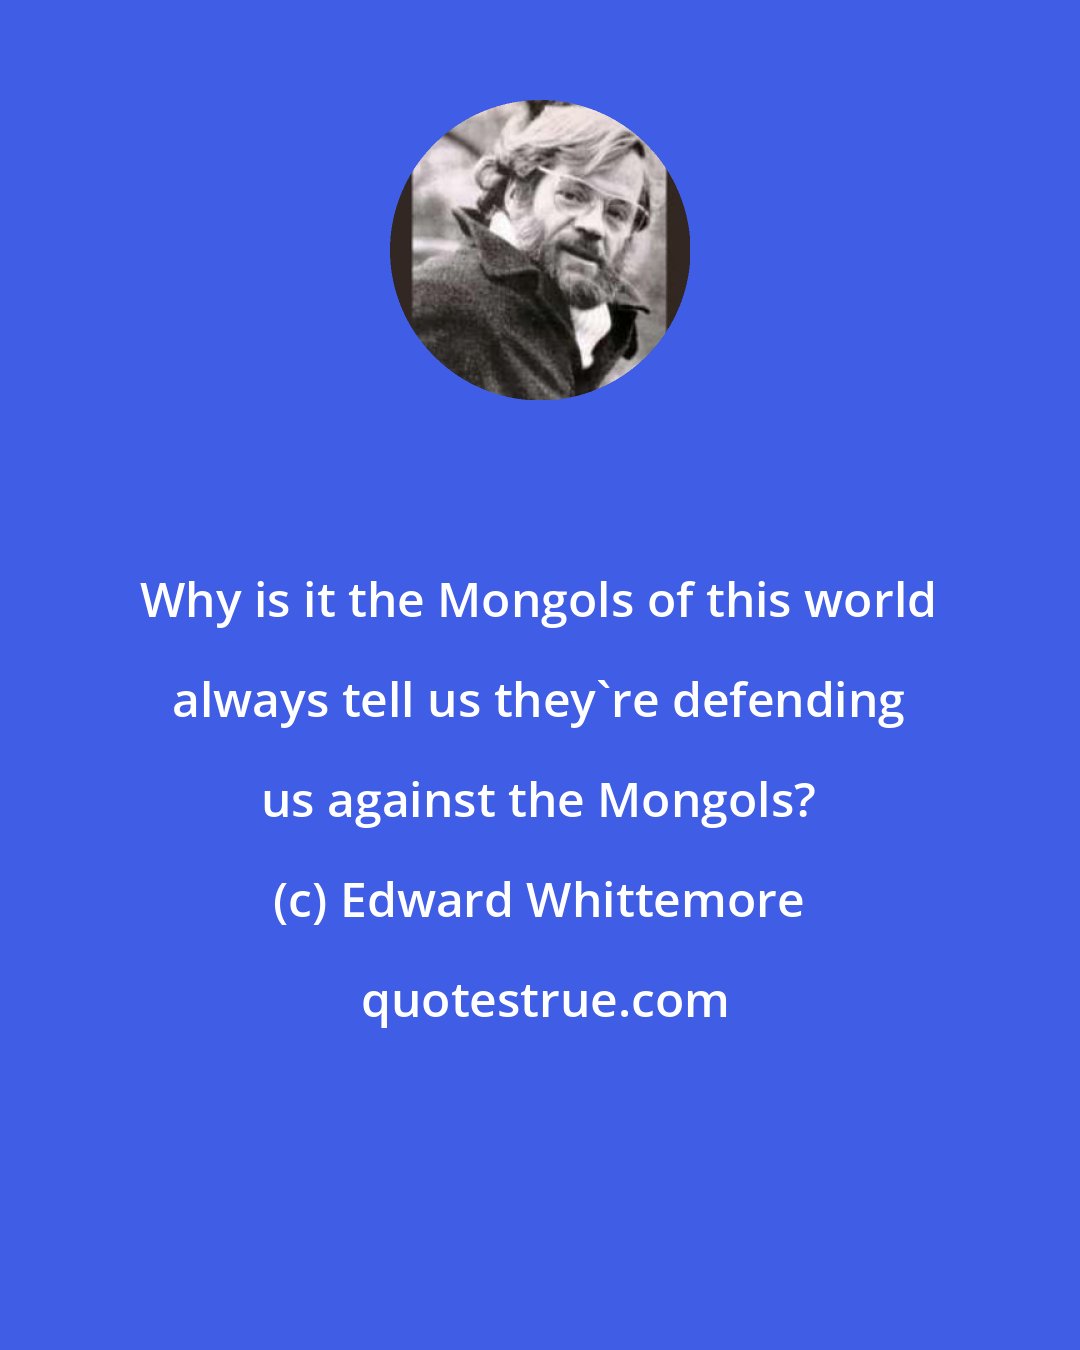 Edward Whittemore: Why is it the Mongols of this world always tell us they're defending us against the Mongols?